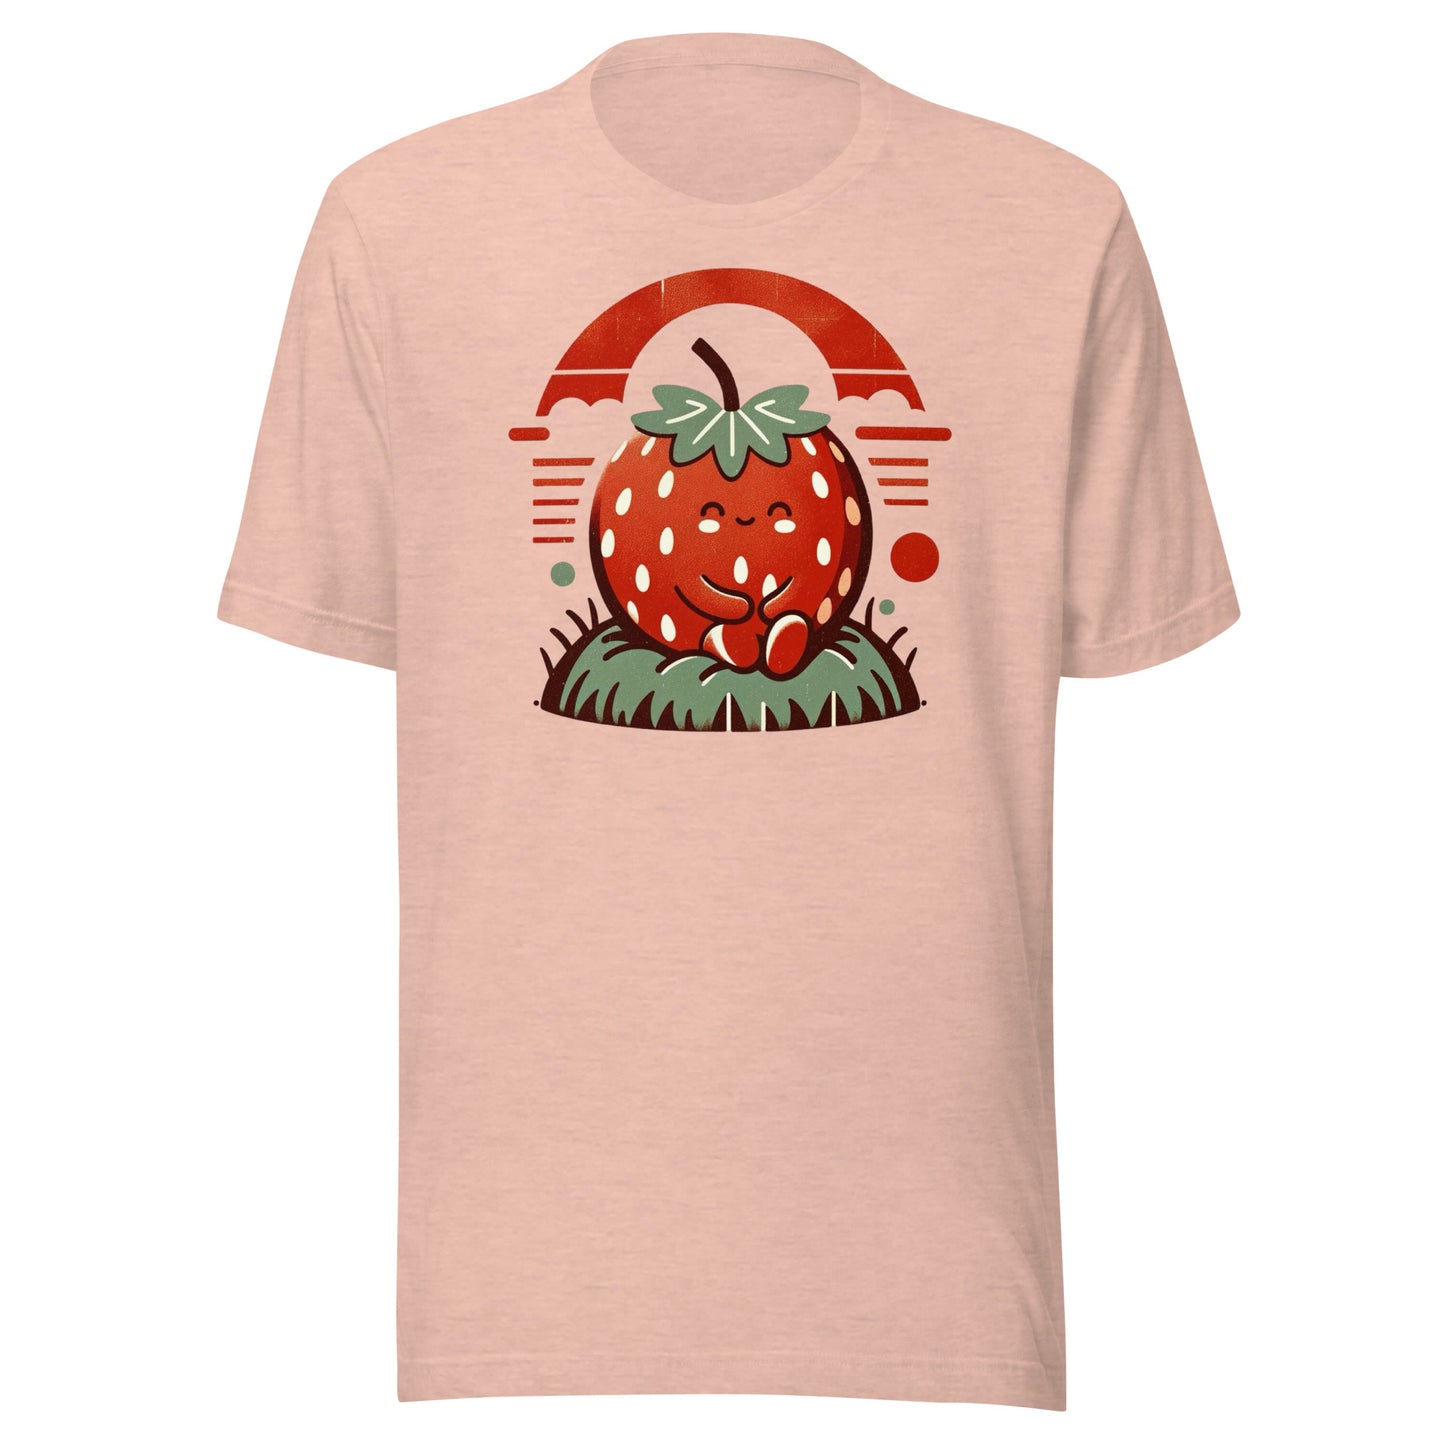 Berry Charming - Smiling Strawberry with Vintage Flair Unisex Tee